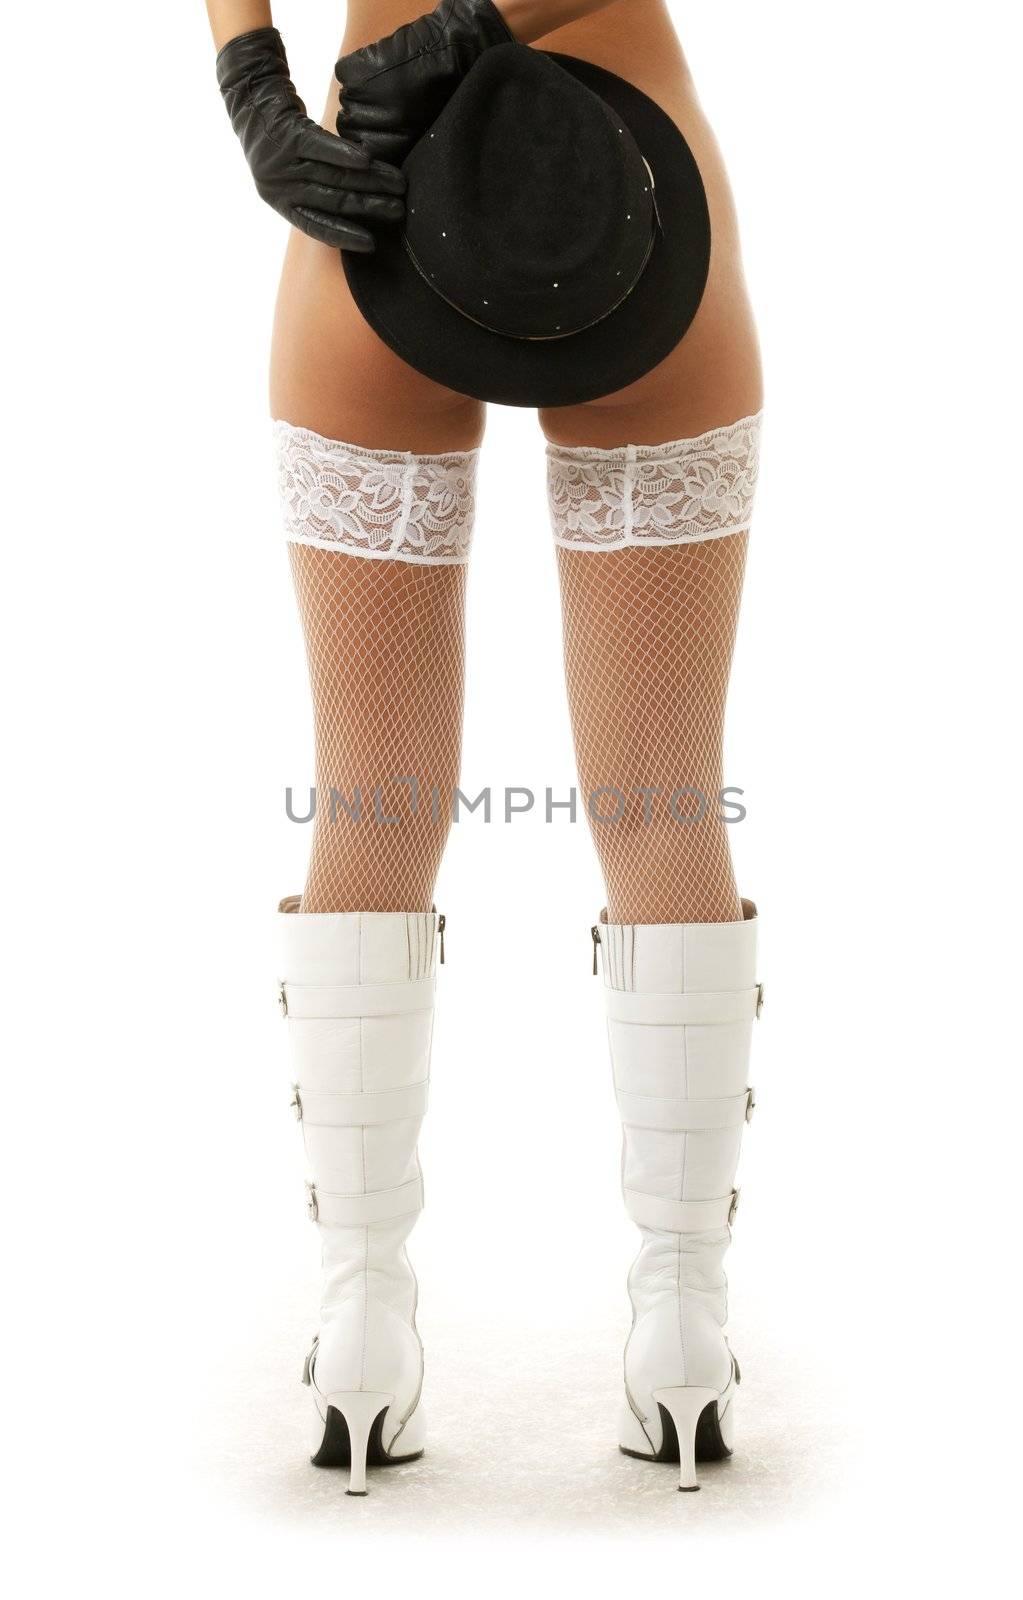 naked girl in white boots and stockings with hat